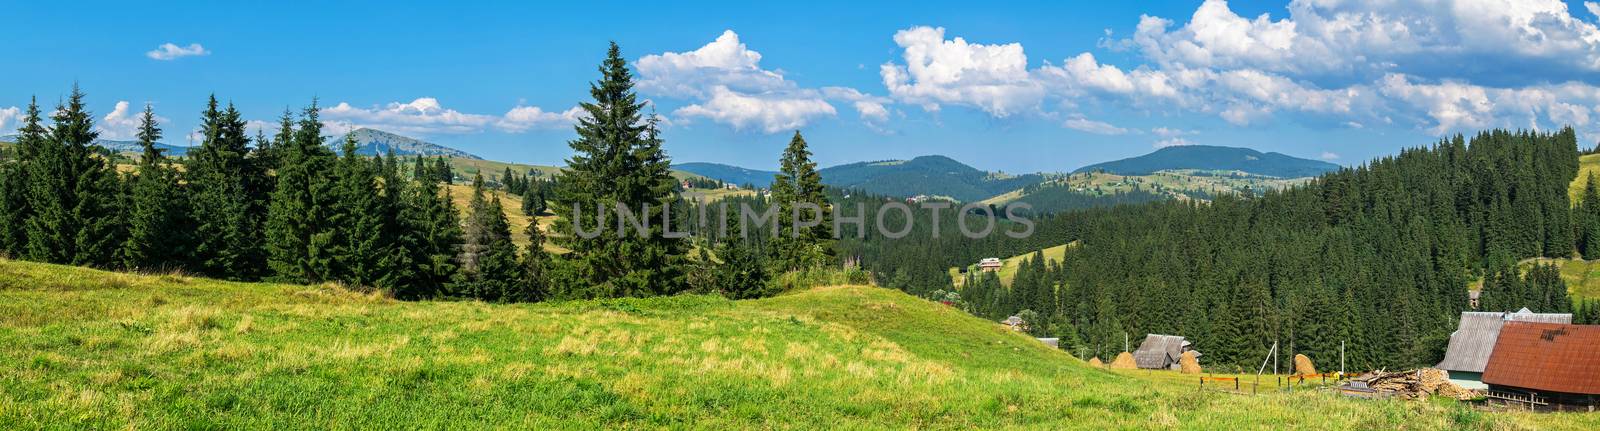 village houses on the slopes of mountains among meadows and spruce forests under a blue cloudy sky. place of rest, tourism, travel